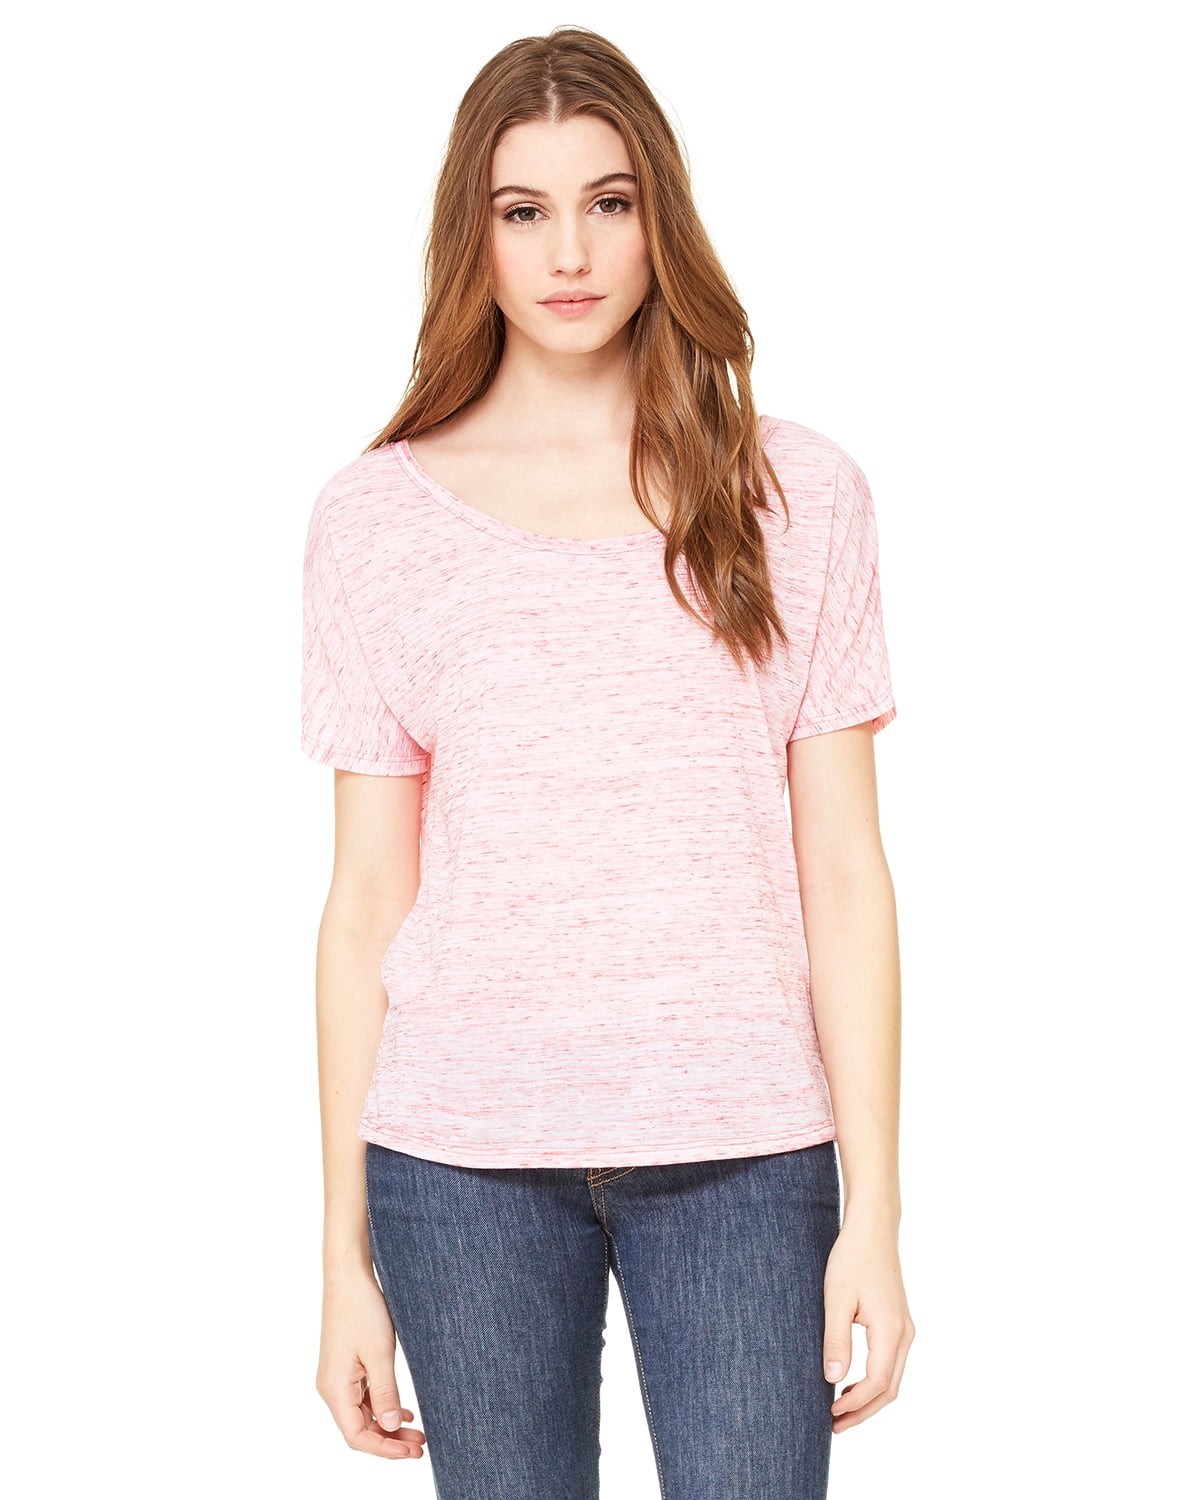 BELLA+CANVAS - Bella + Canvas, The Ladies' Slouchy T-Shirt - RED MARBLE ...